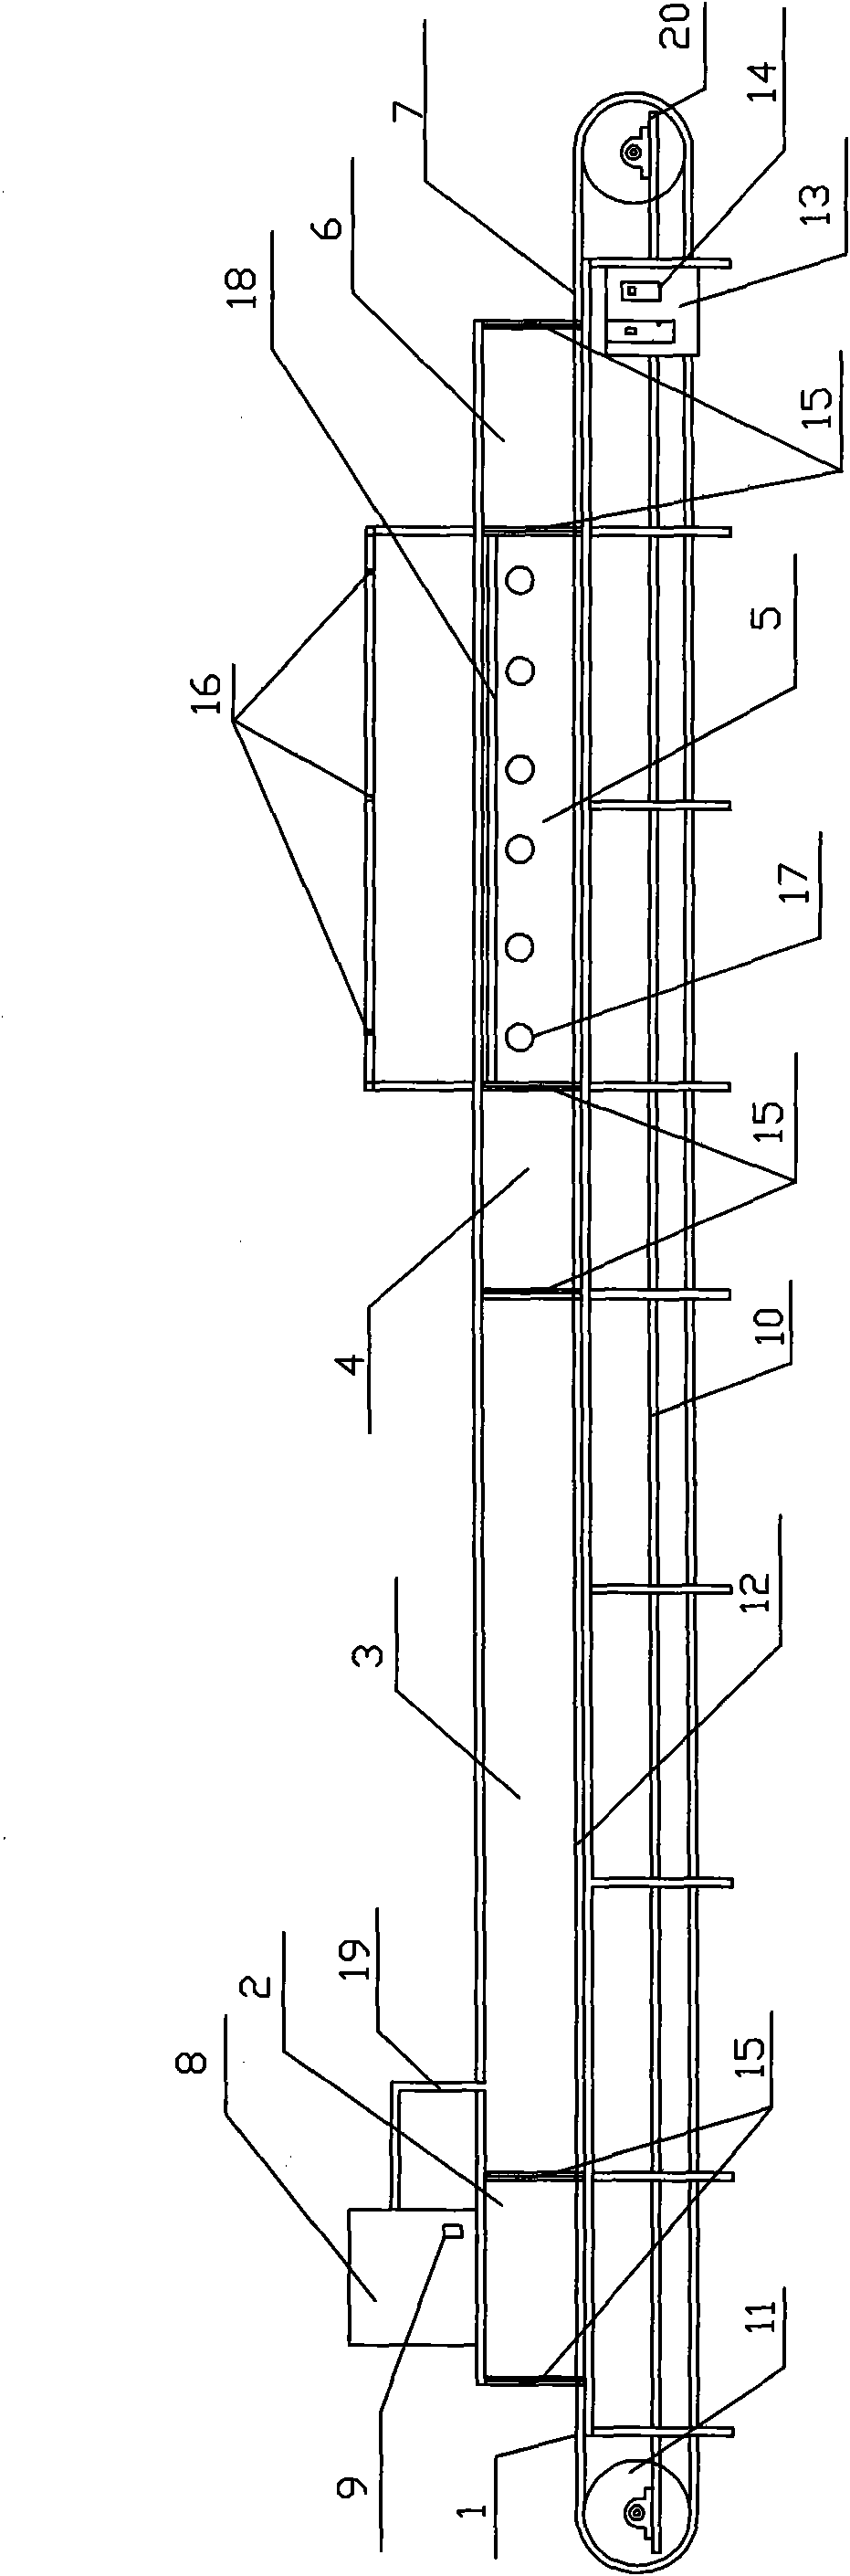 Large-scale aseptic-manipulation continuous production equipment